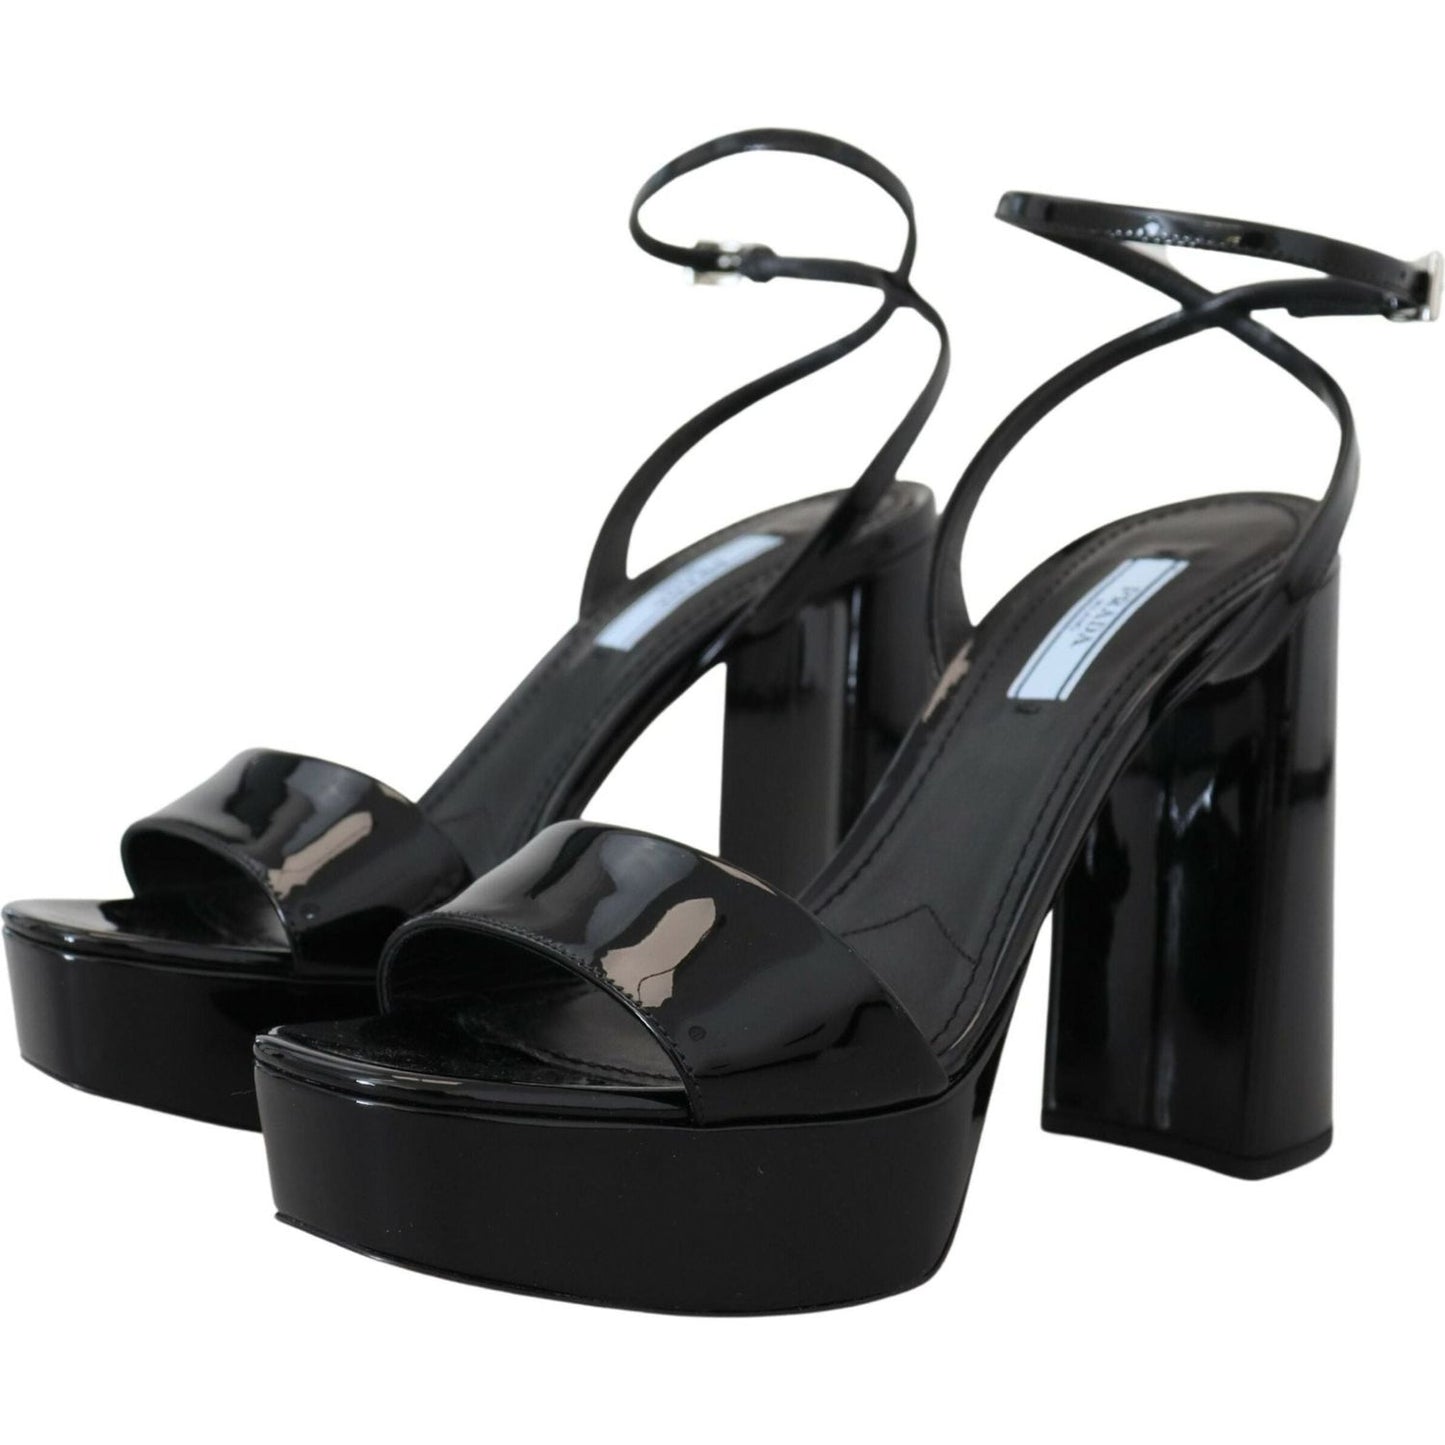 Prada Elevate Your Elegance with Glossy Black Heels black-patent-sandals-ankle-strap-heels-leather IMG_8362-1-scaled-b02d2549-4d3.jpg